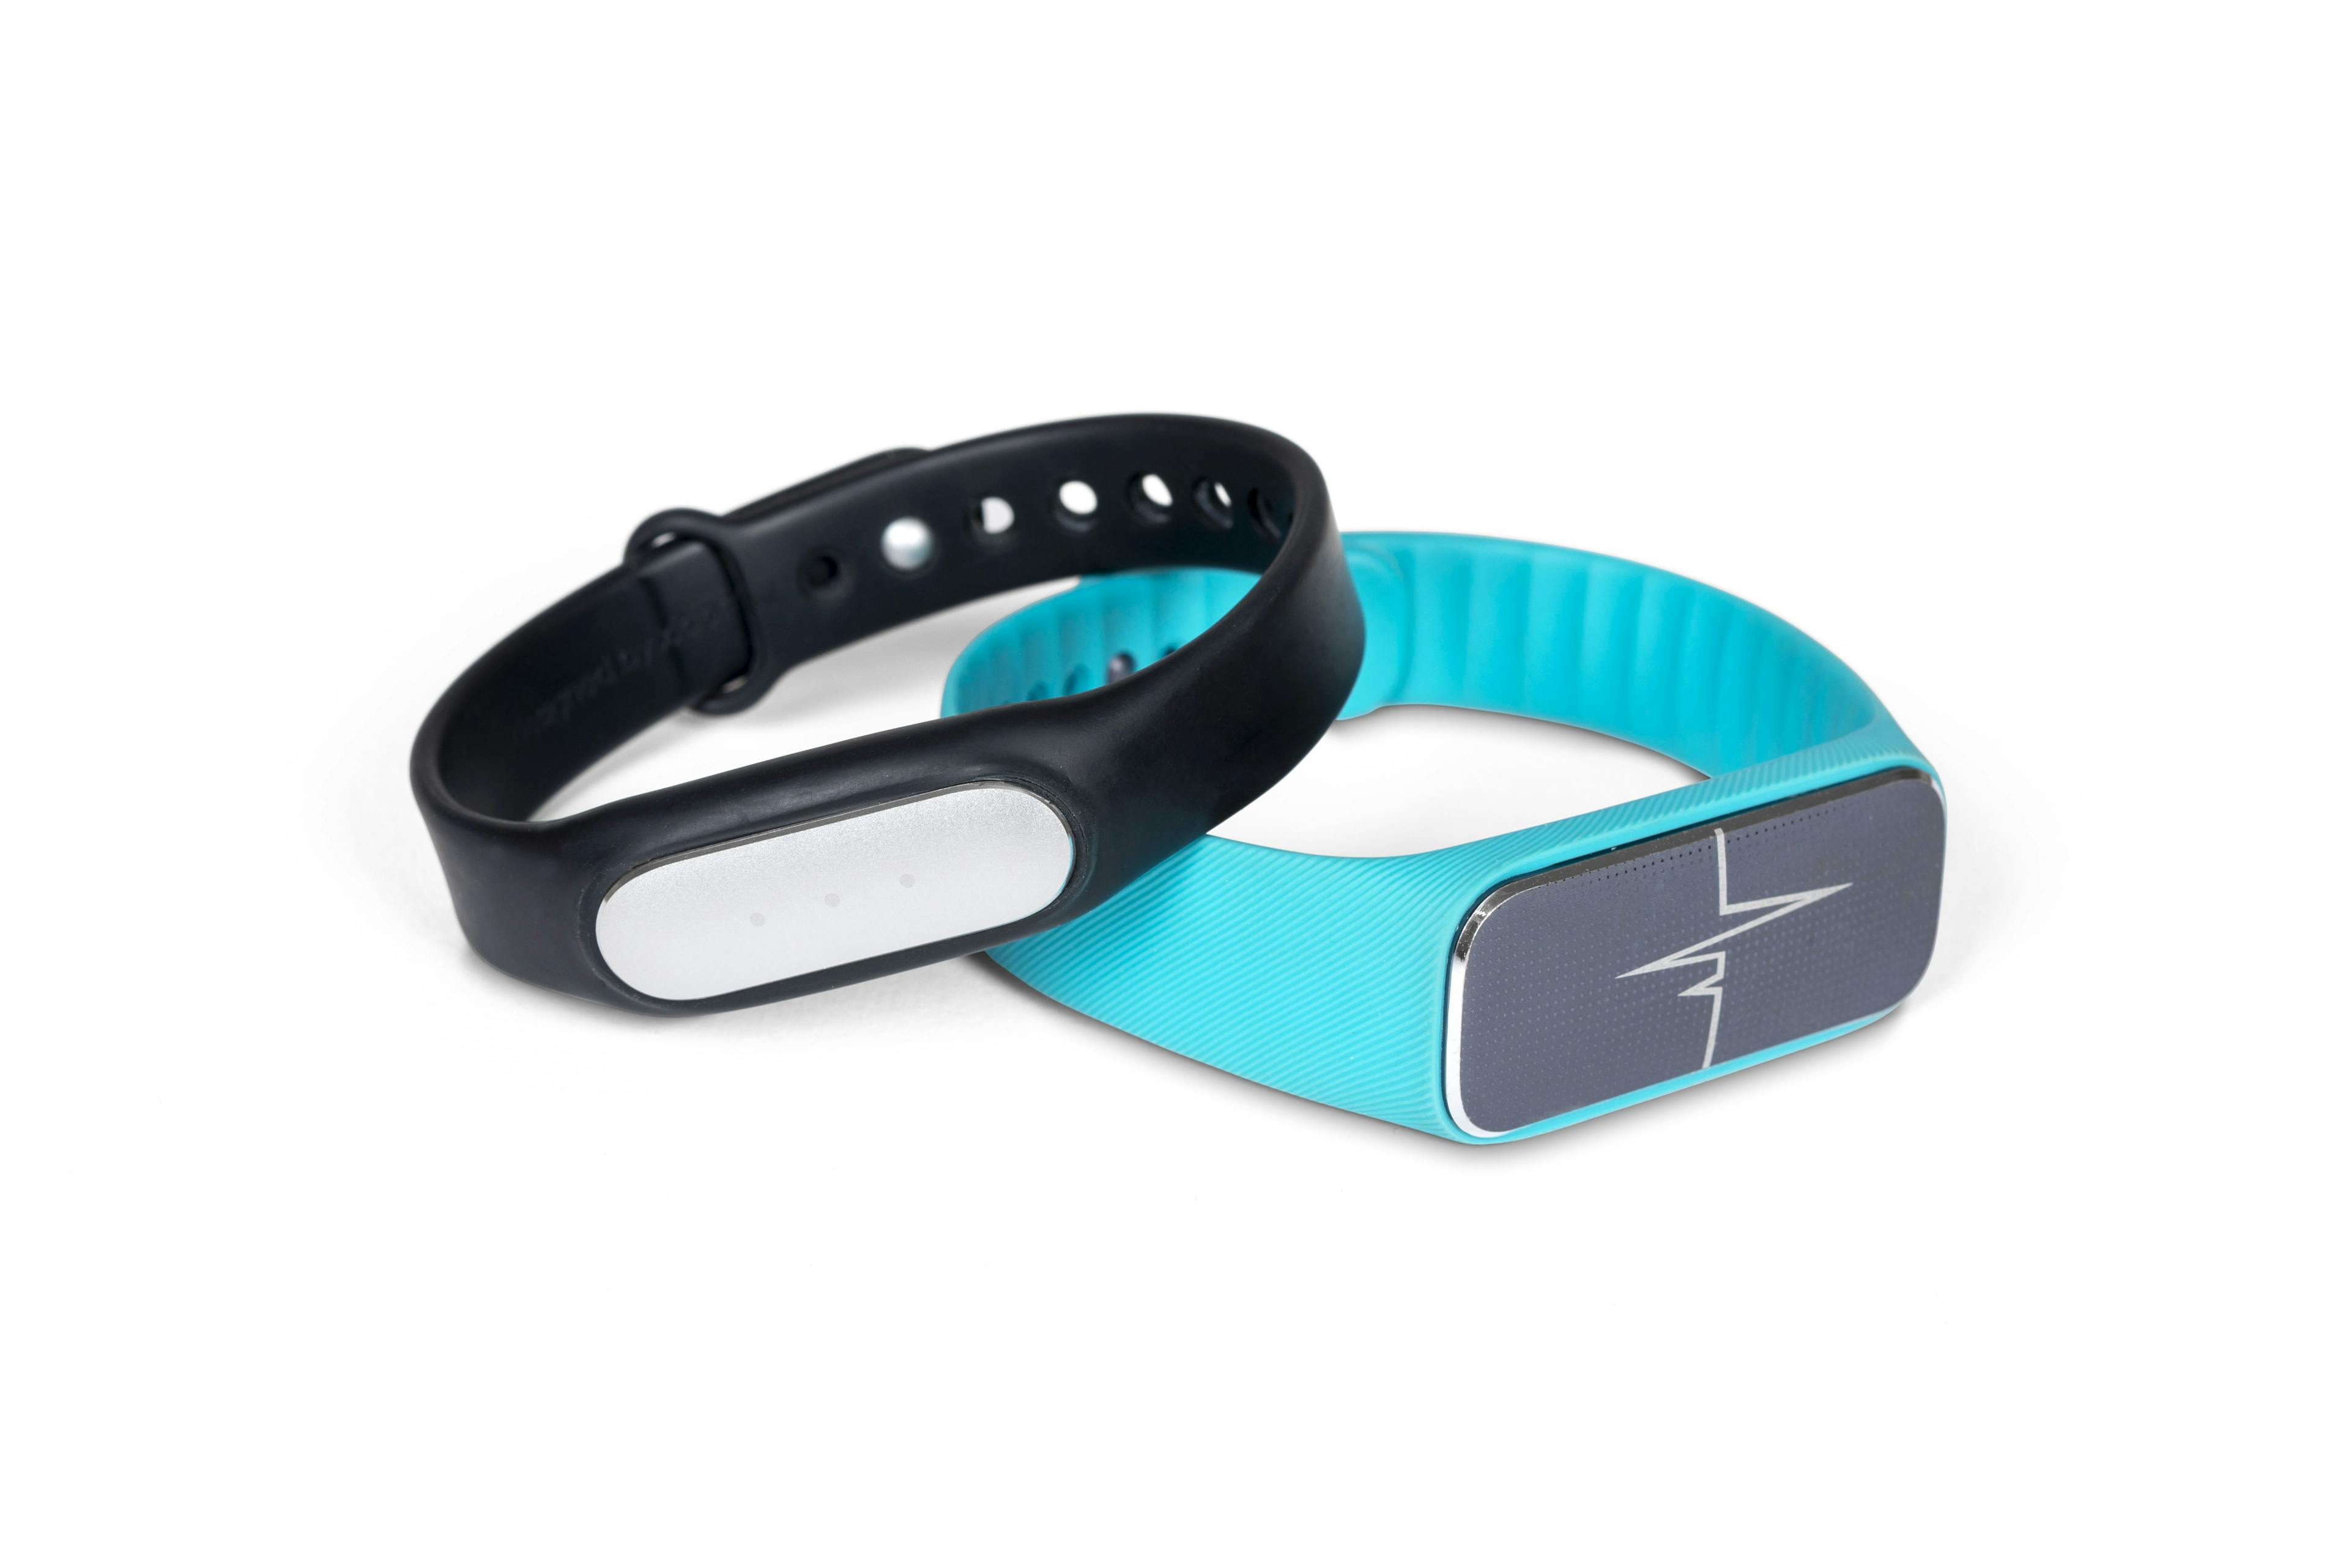 2 fitness trackers, one in blue and one in black